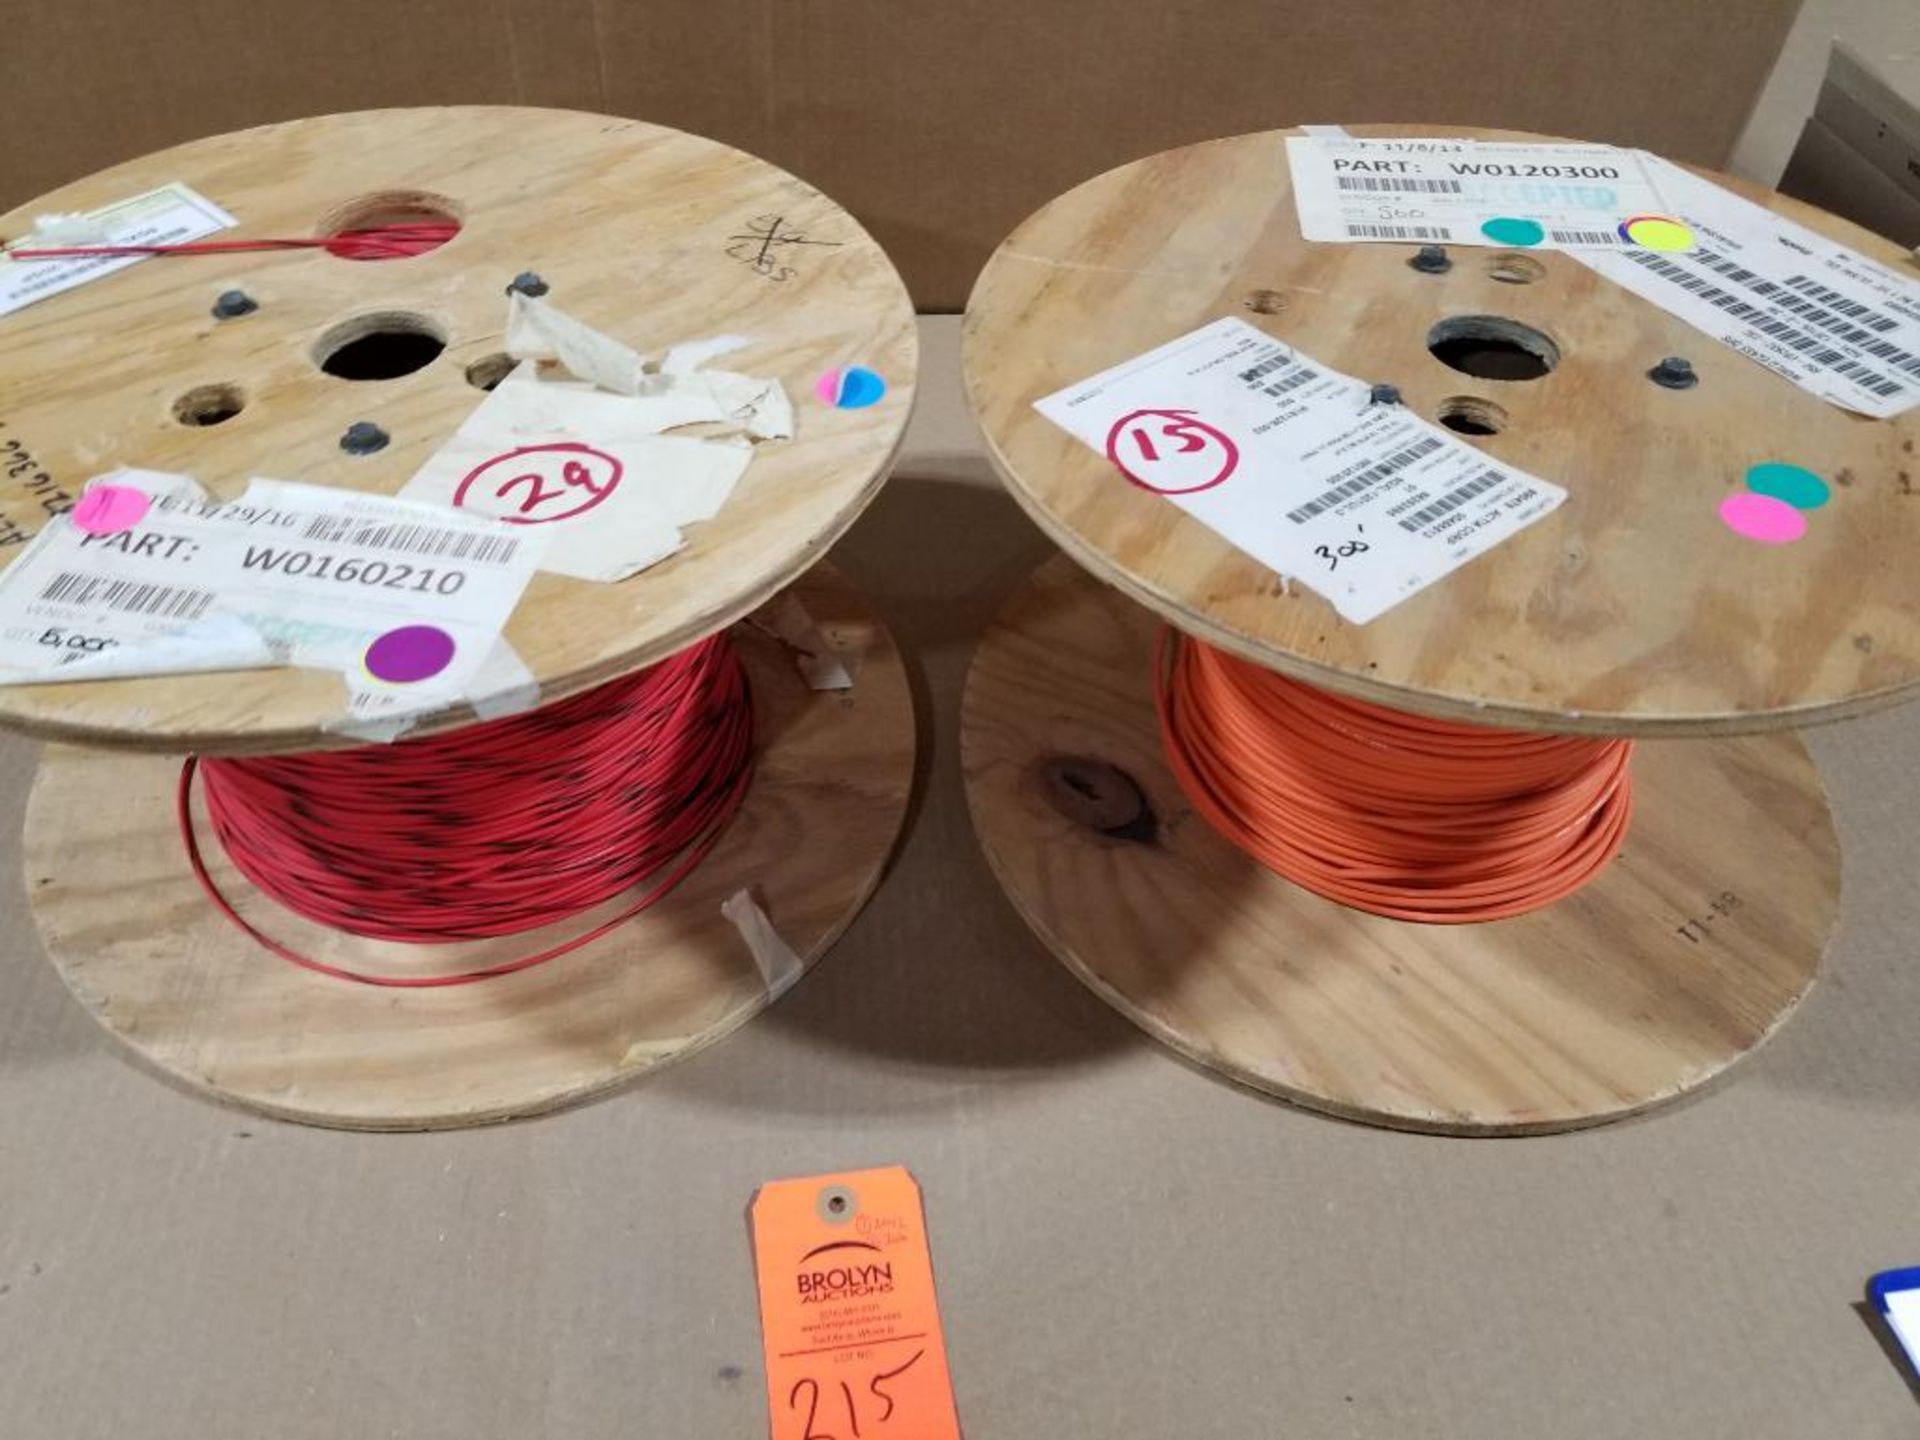 Qty 2 - 16 and 12 awg  assorted color copper wire. 44lbs total gross combined weight for all rolls.